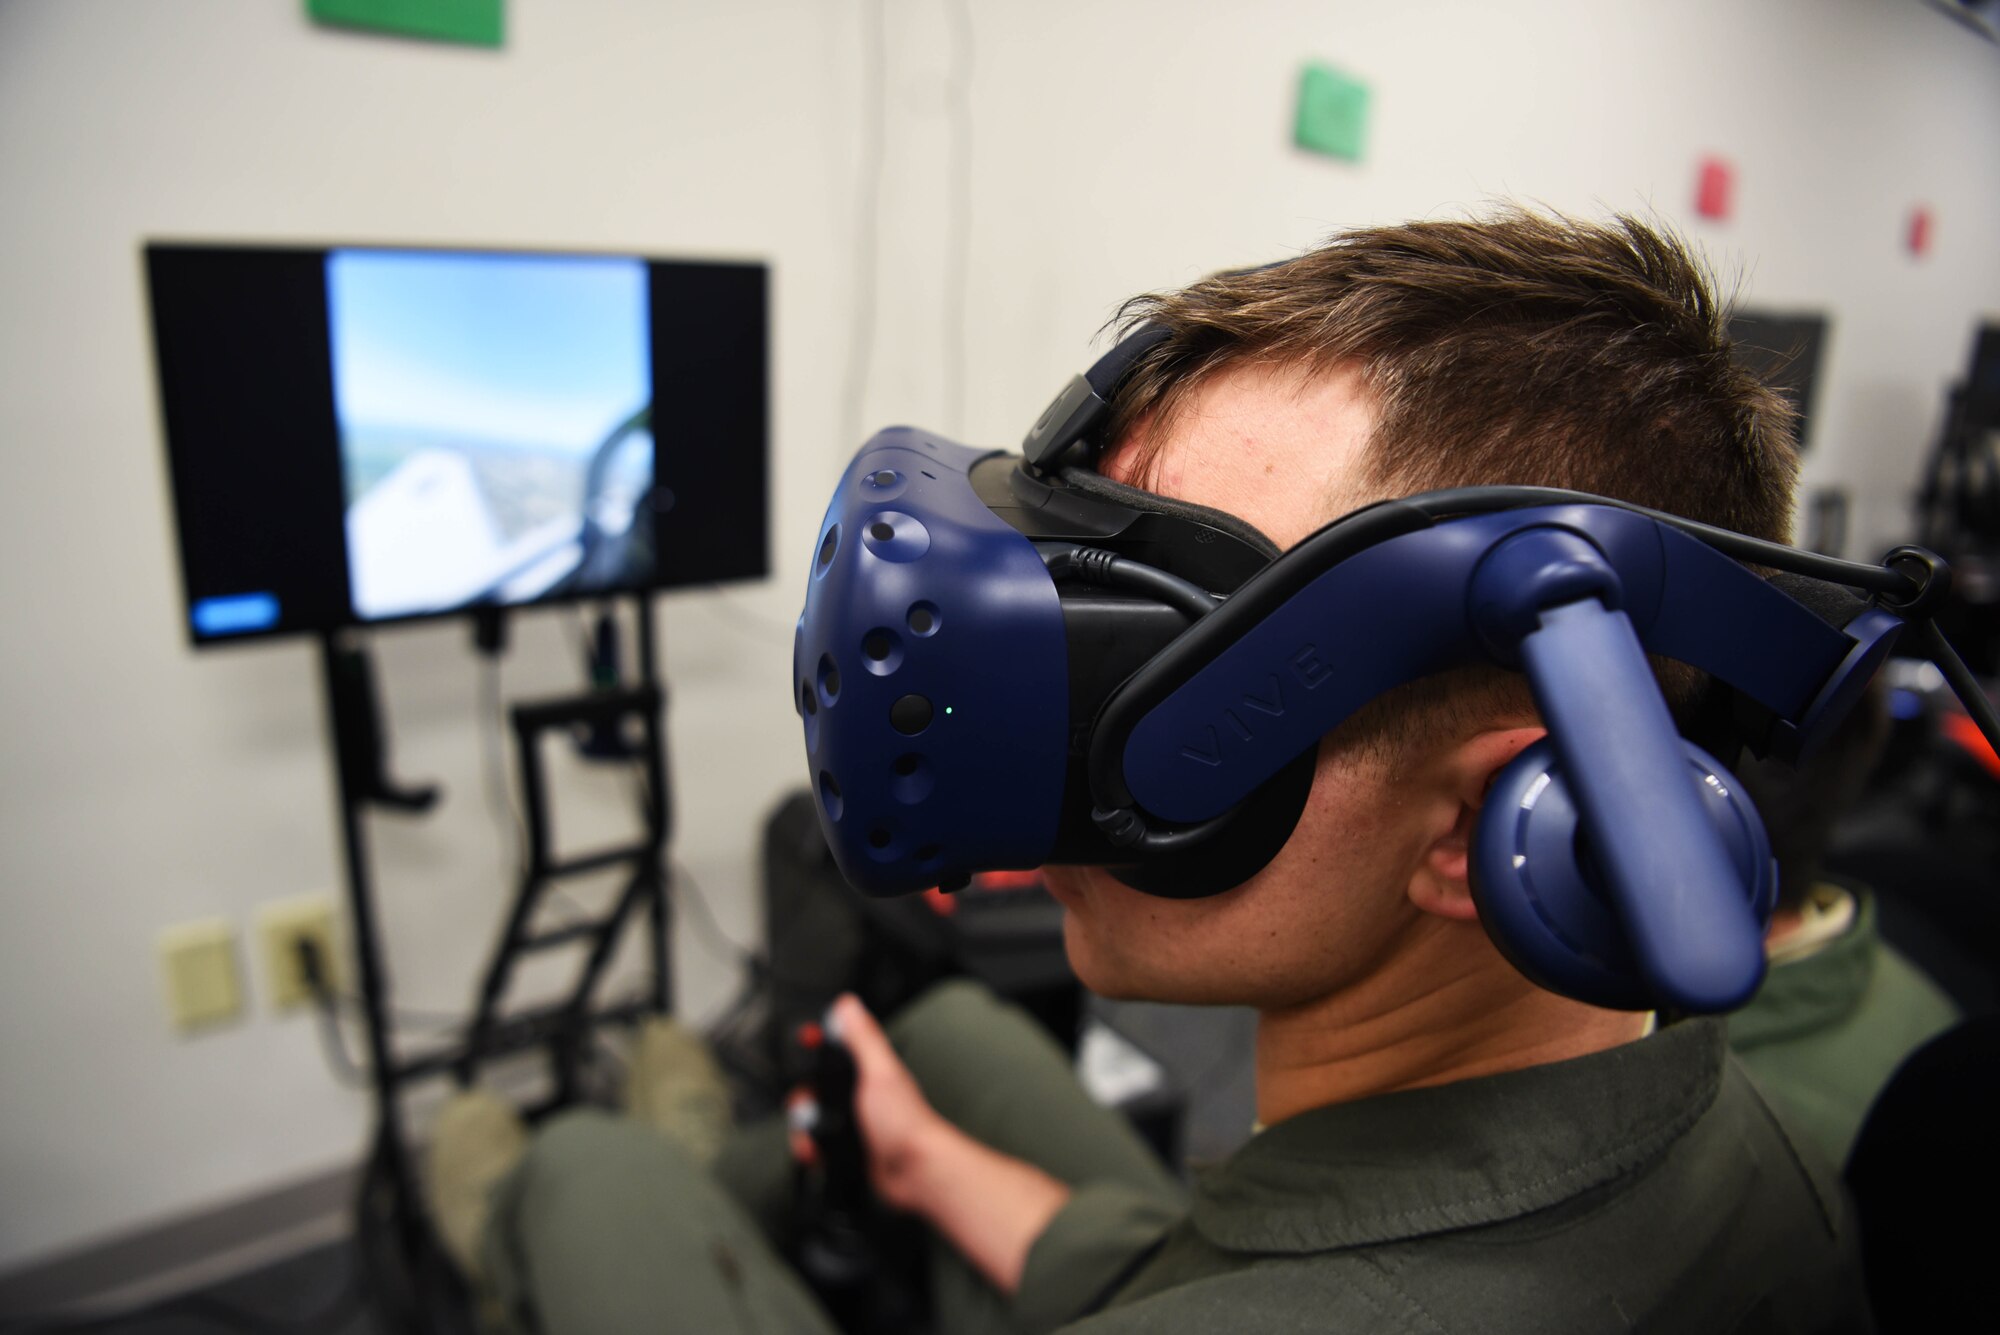 Second Lt. Matthew Demarco, 14th Student Squadron student pilot, looks around with the virtual reality flight simulation equipment strapped on Feb. 11, 2020, on Columbus Air Force Base, Miss. With the help of VR equipment, students see the things they would normally see in an aircraft while being able to follow their procedures as the class instructors provides feedback and grading. (U.S. Air Force photo by Airman 1st Class Jake Jacobsen)